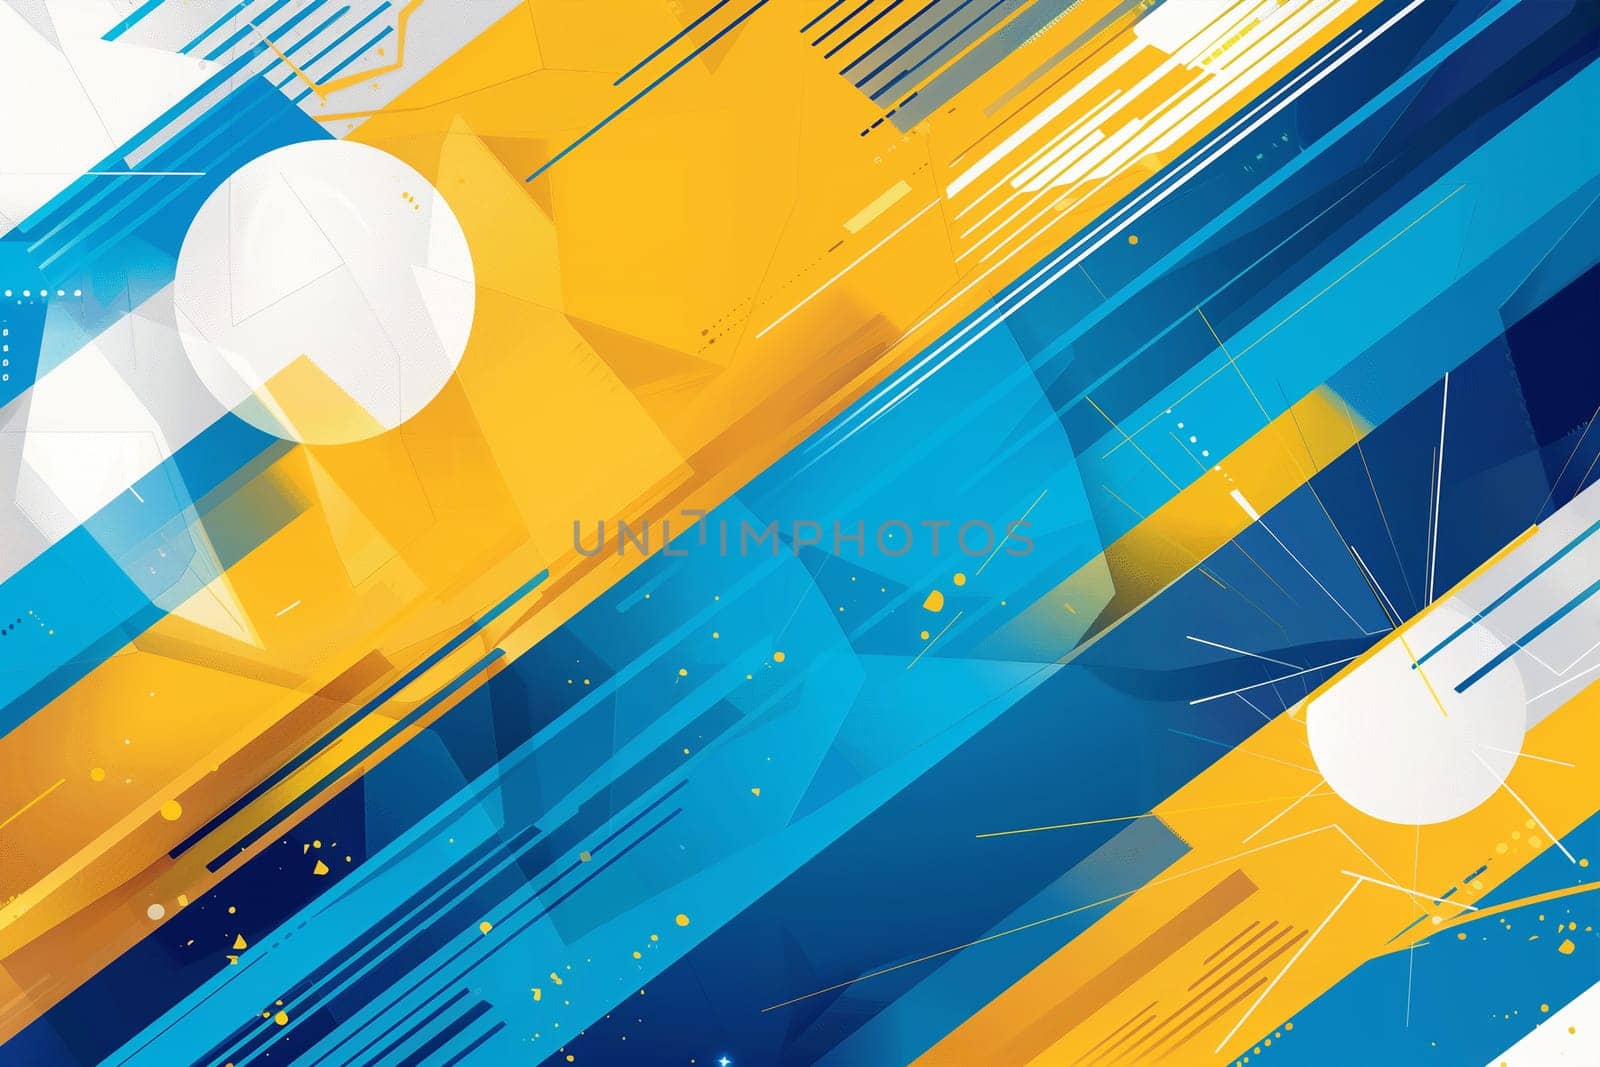 A vibrant abstract background featuring circles in shades of blue and yellow. The circles are various sizes and overlap each other creating a dynamic and visually interesting composition.